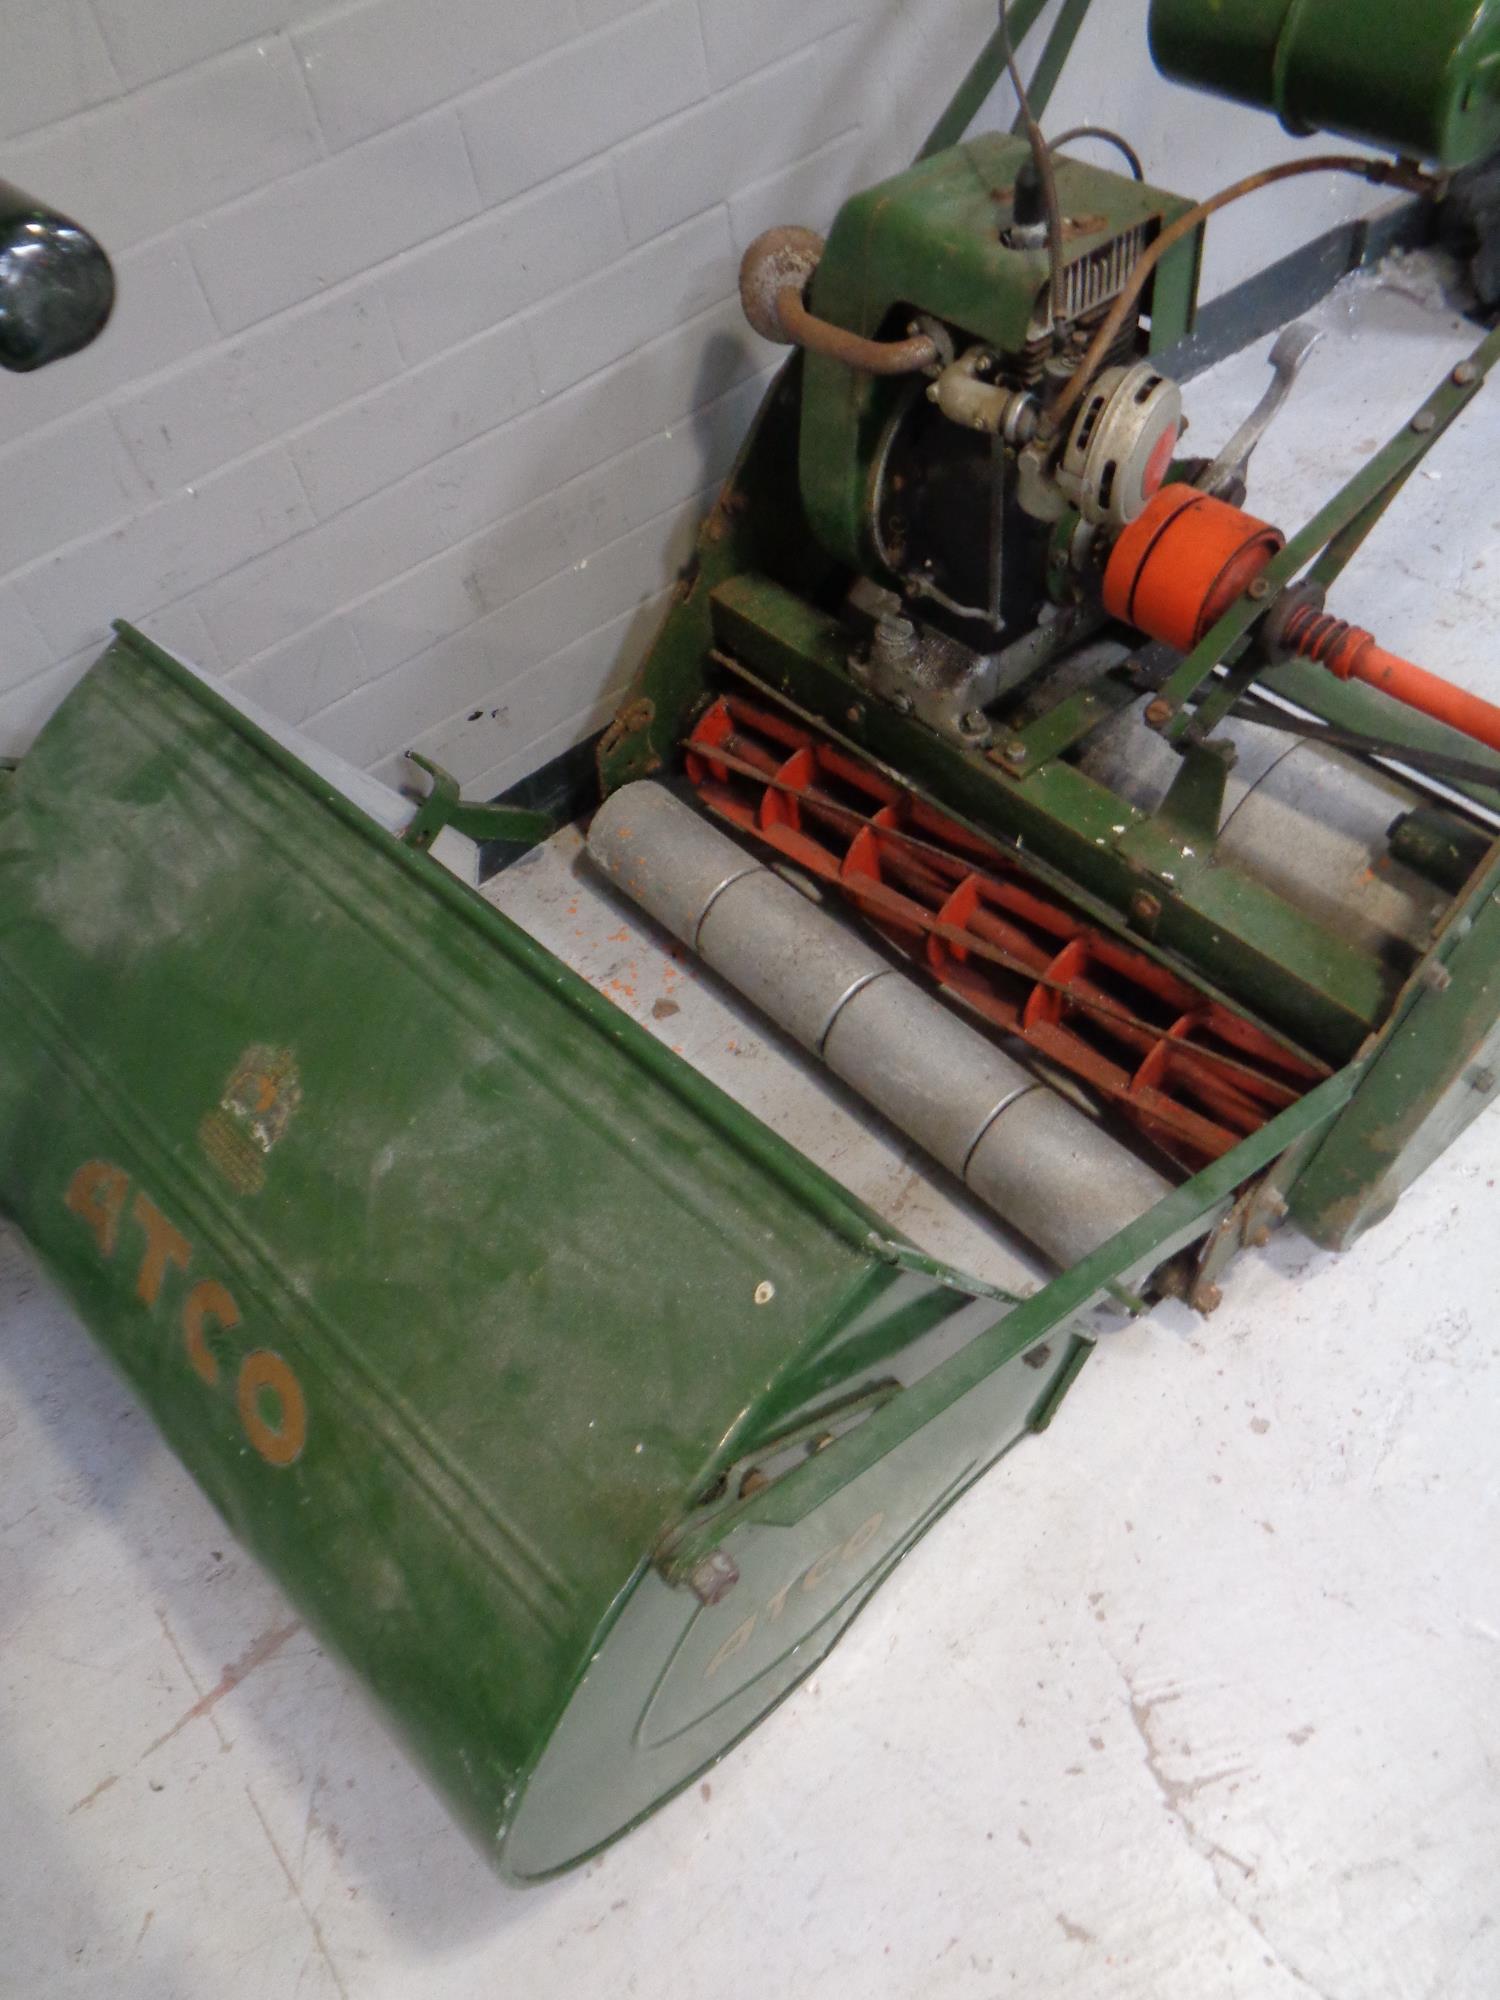 A vintage Atco petrol lawn mower with Villiers 1100 engine with built in roller and grass box - Image 2 of 2